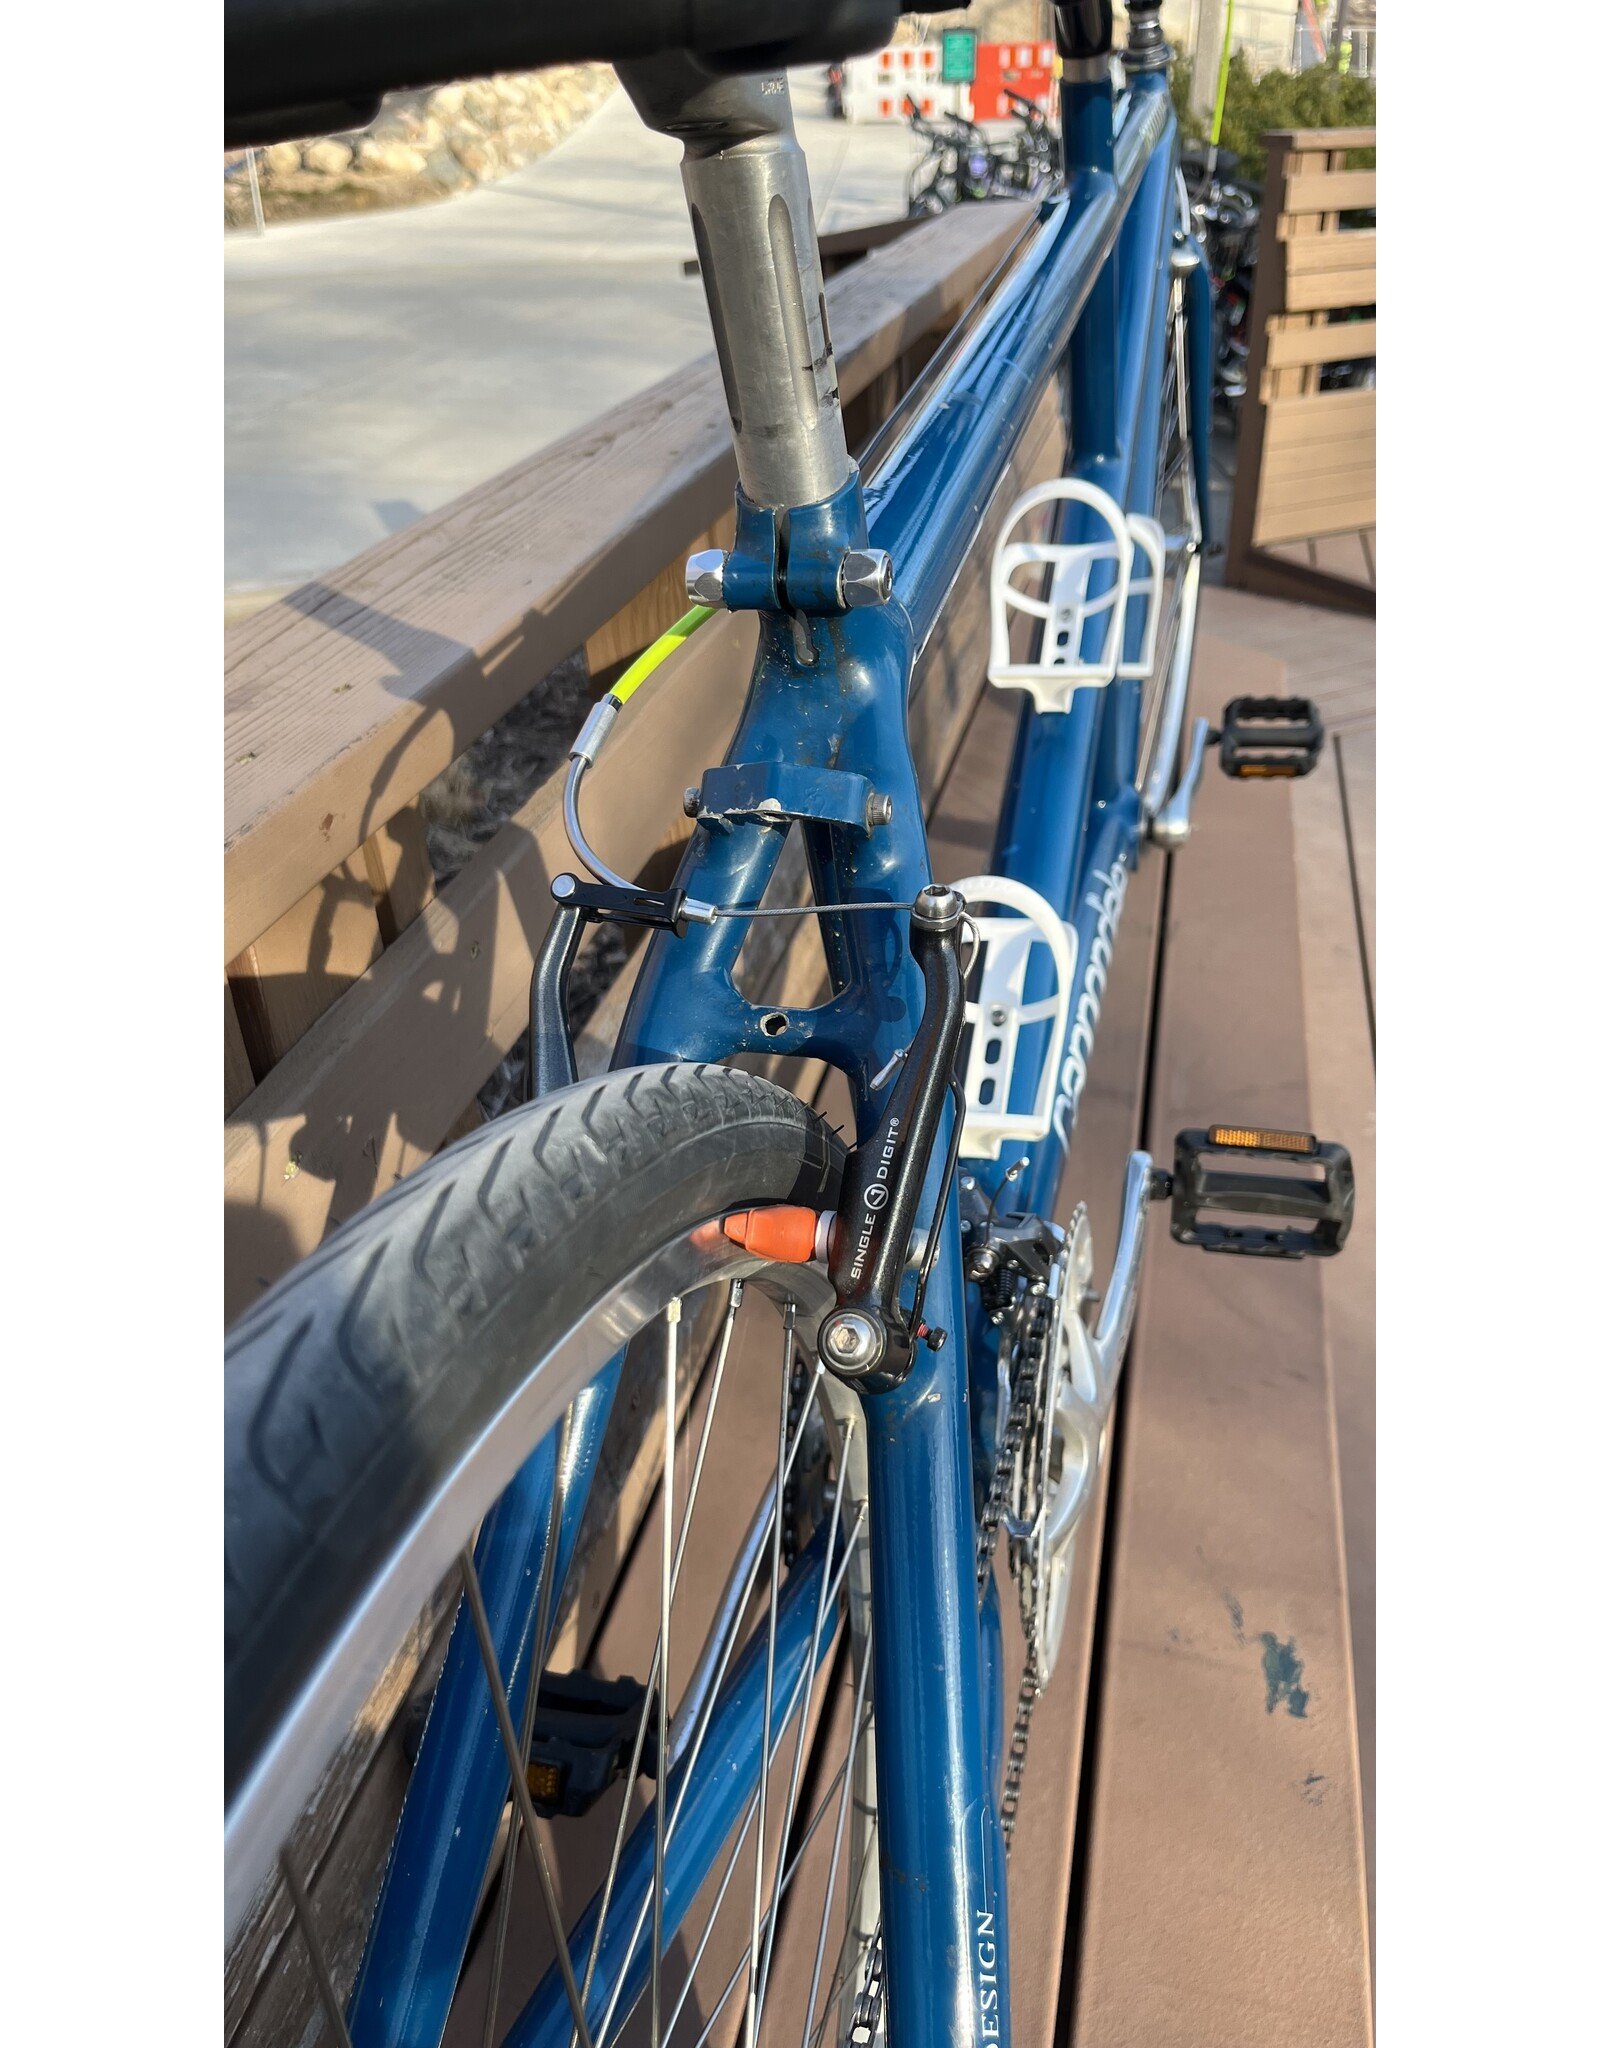 Cannondale tandem, 20 in - 17 in, blue-teal